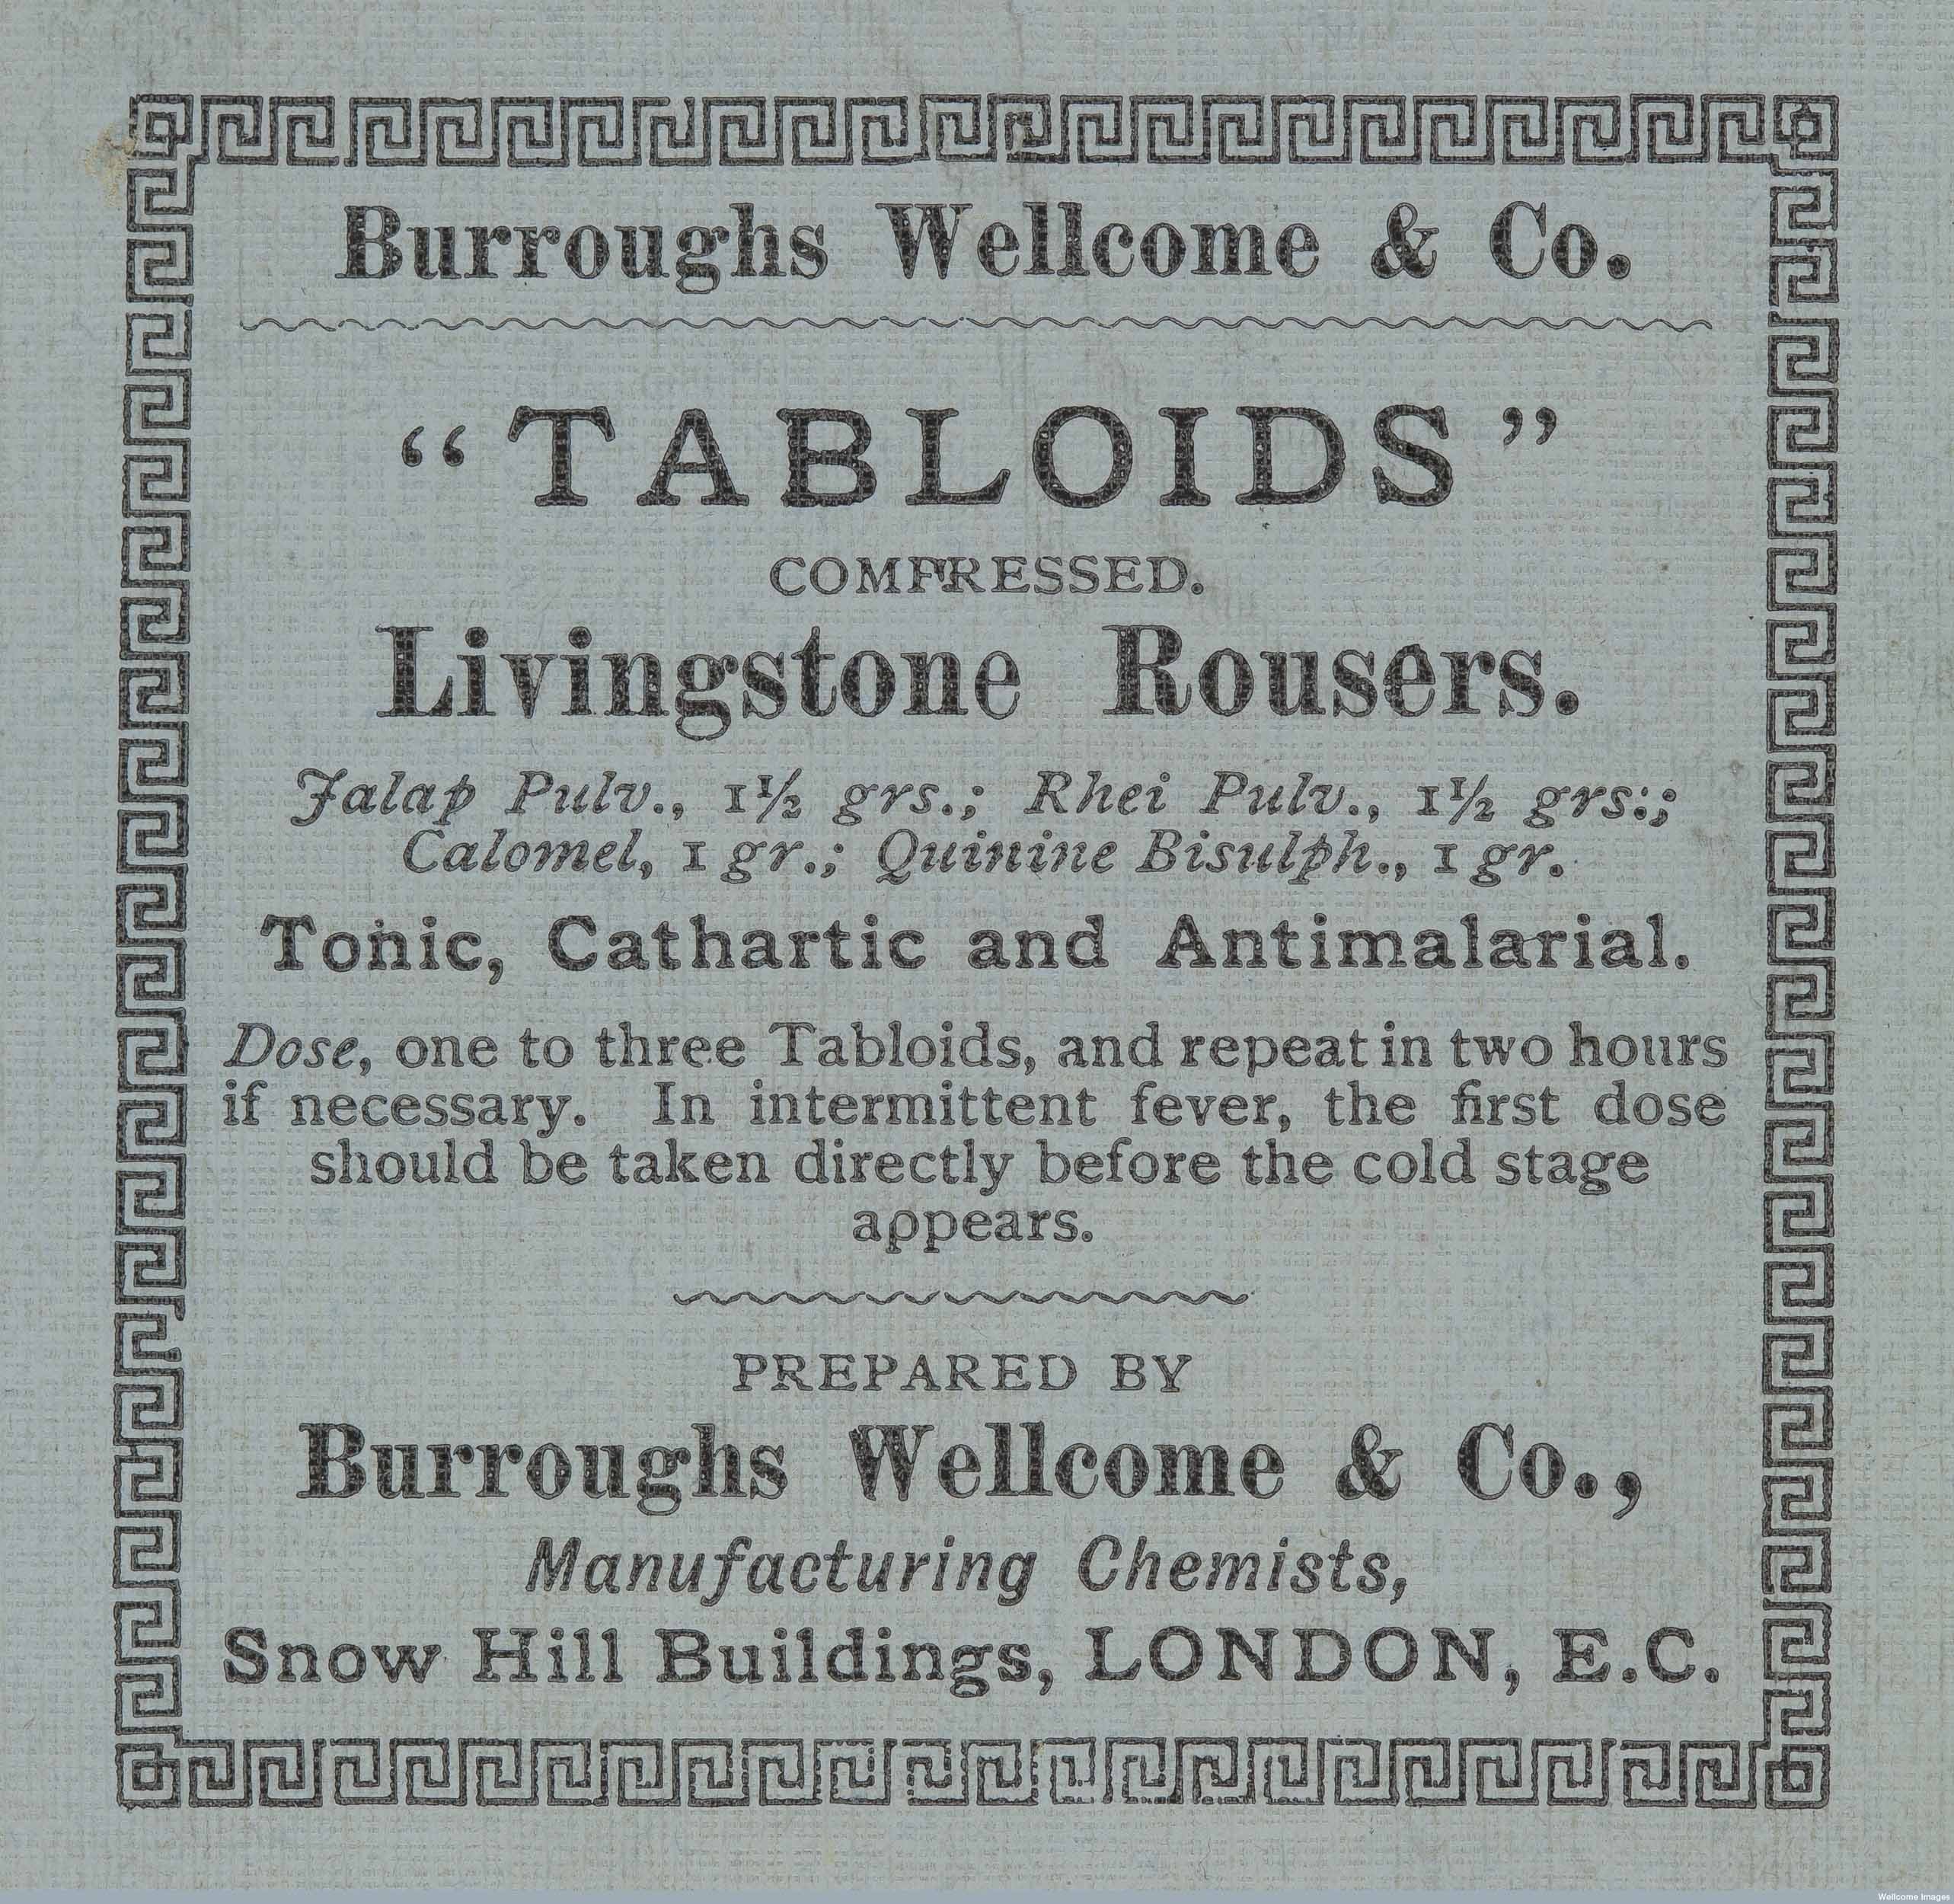 Pharmaceutical advert for 'Tabloids', compressed Livingstone Rousers.  Copyright Wellcome Library, London. Creative Commons Attribution 4.0 International(https://creativecommons.org/licenses/by/4.0/).